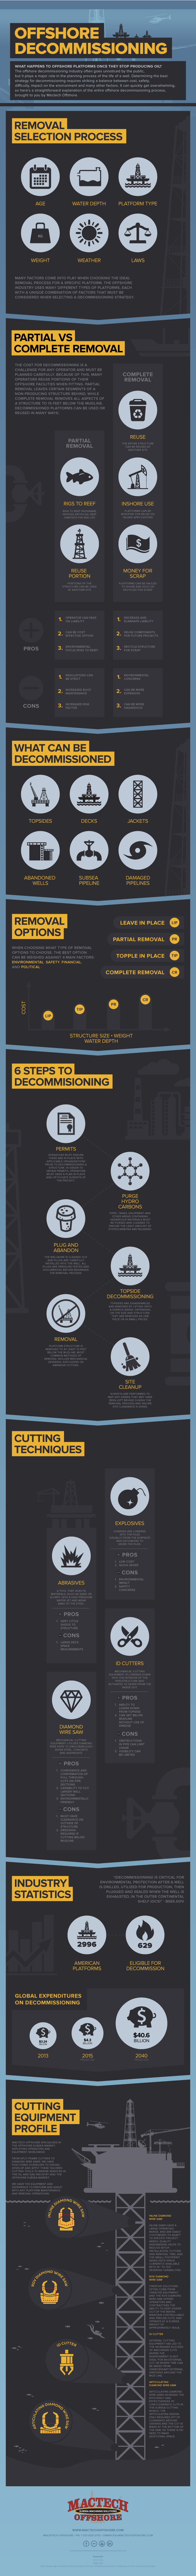 What is offshore decommissioning infographic